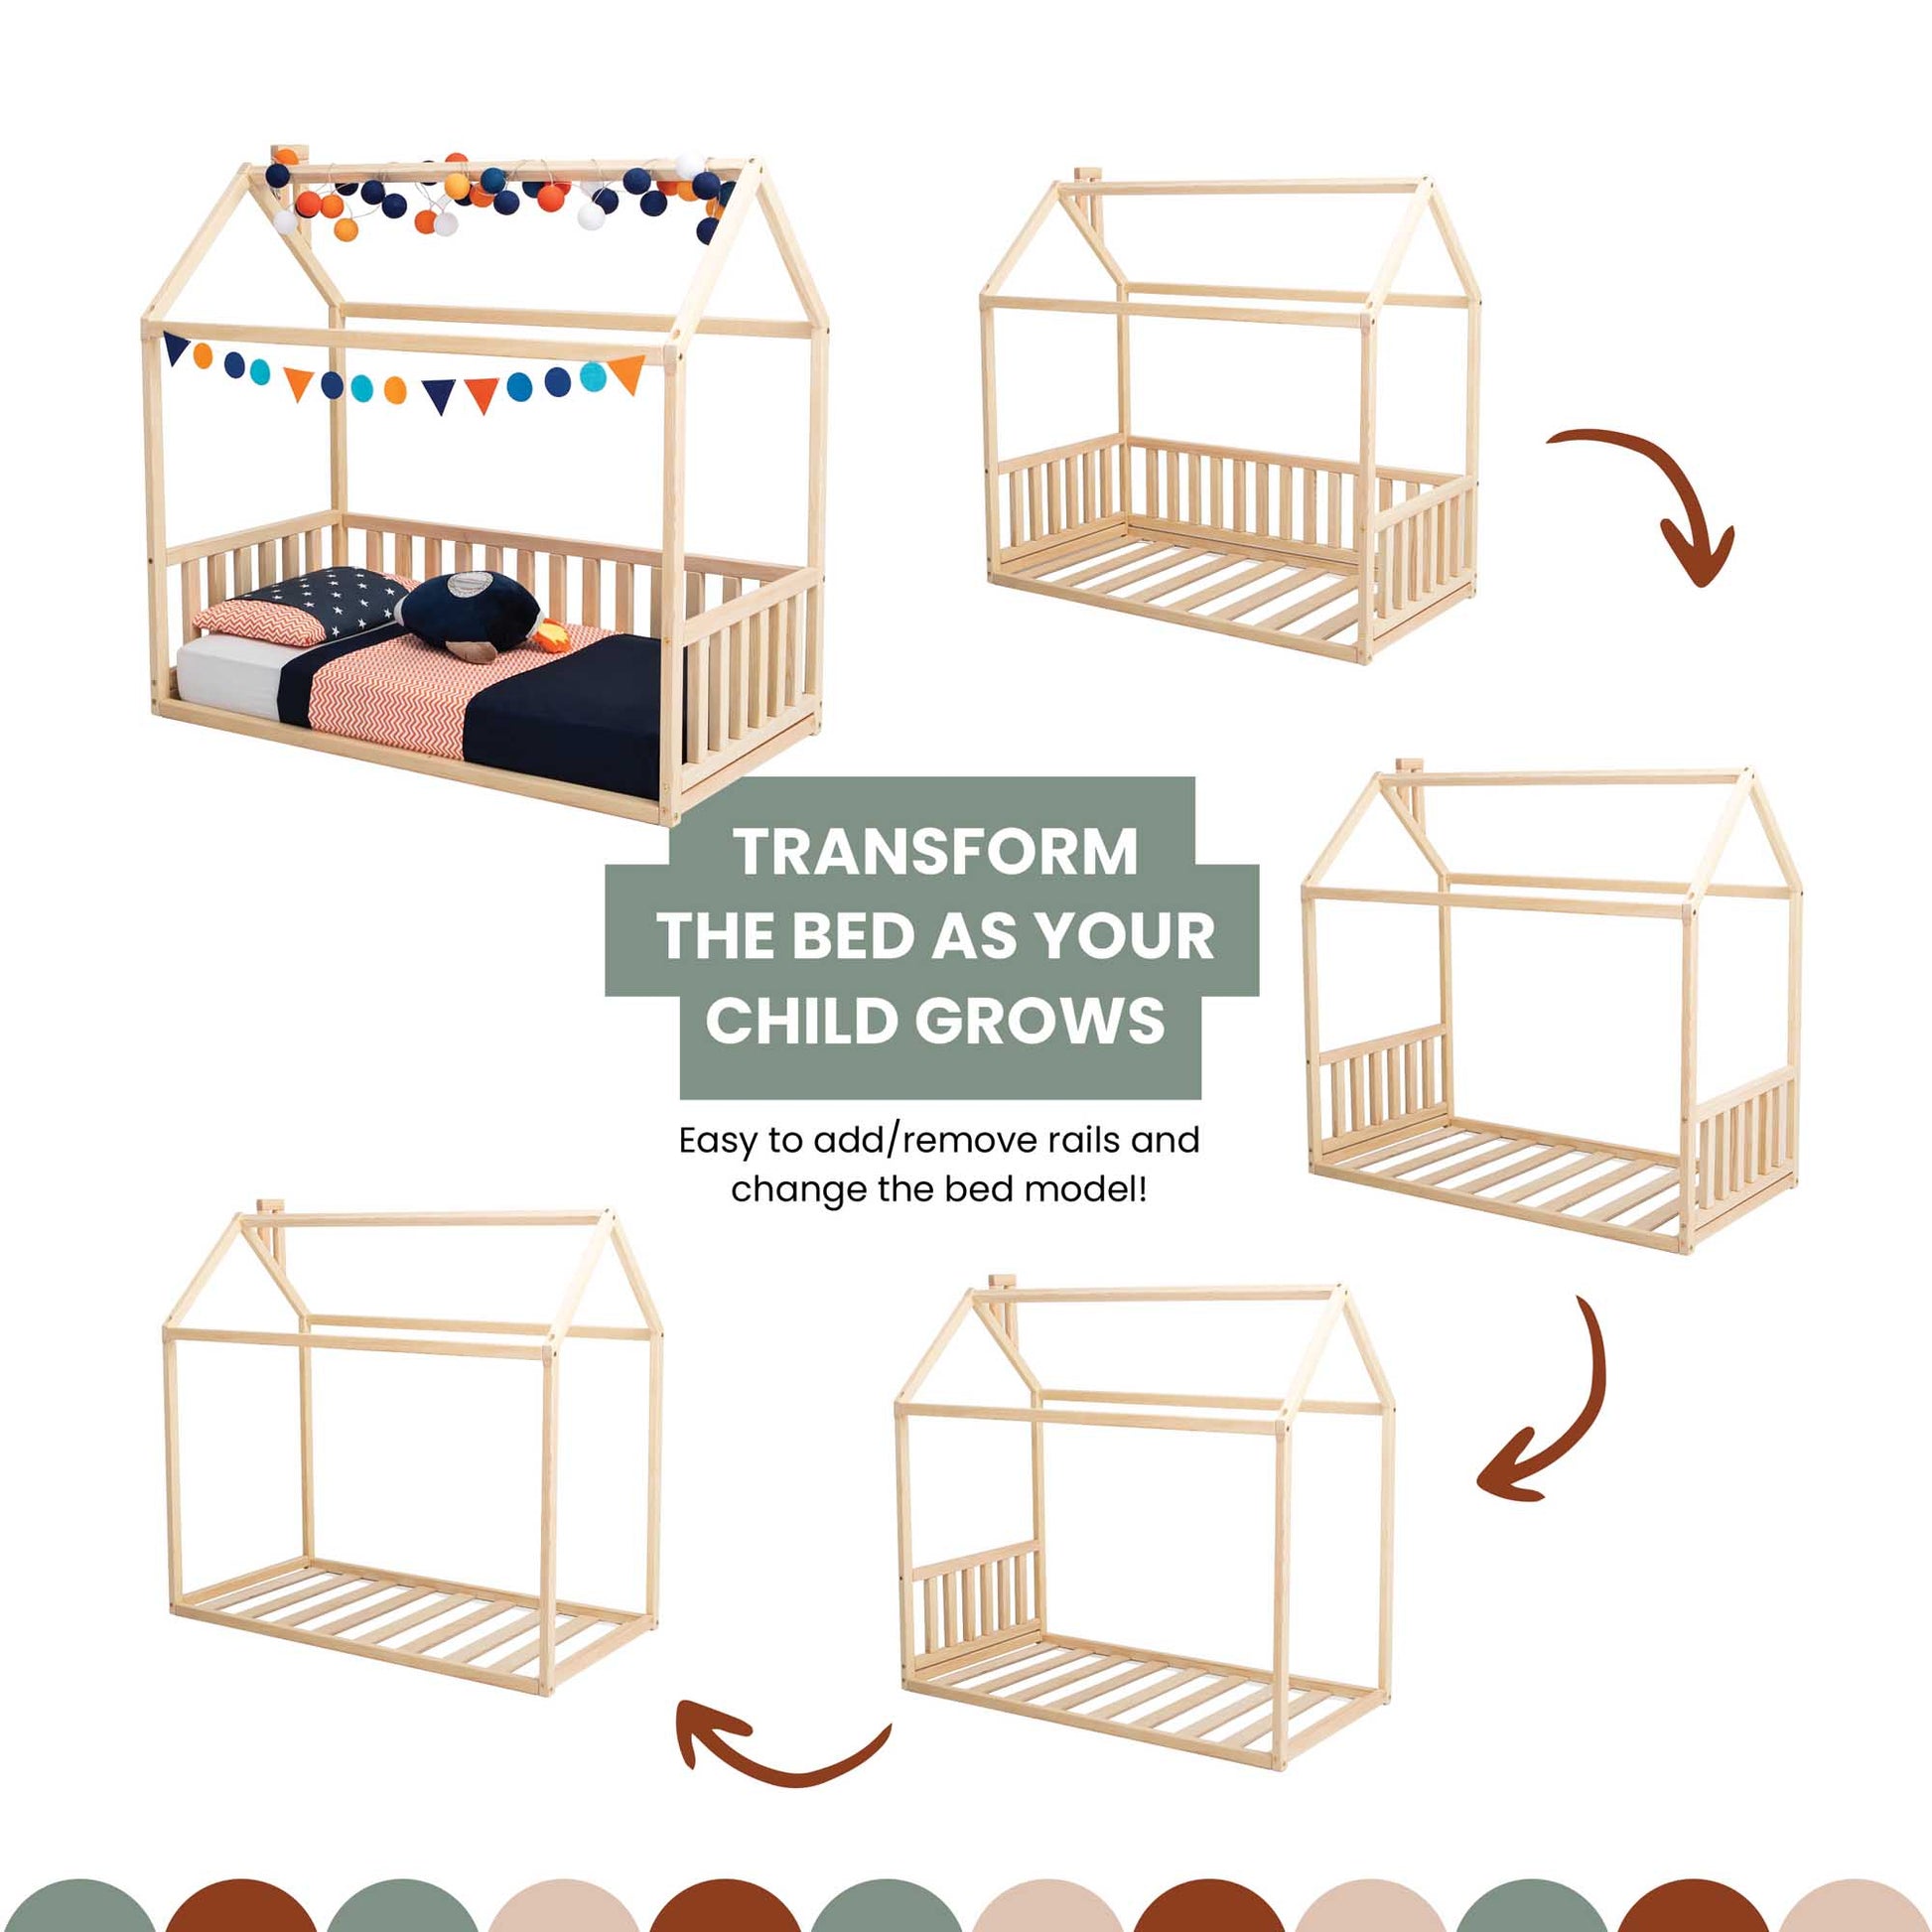 Create a cozy sleep haven with the Sweet Home From Wood Kids' house-frame bed with 3-sided rails, perfect for your growing child.